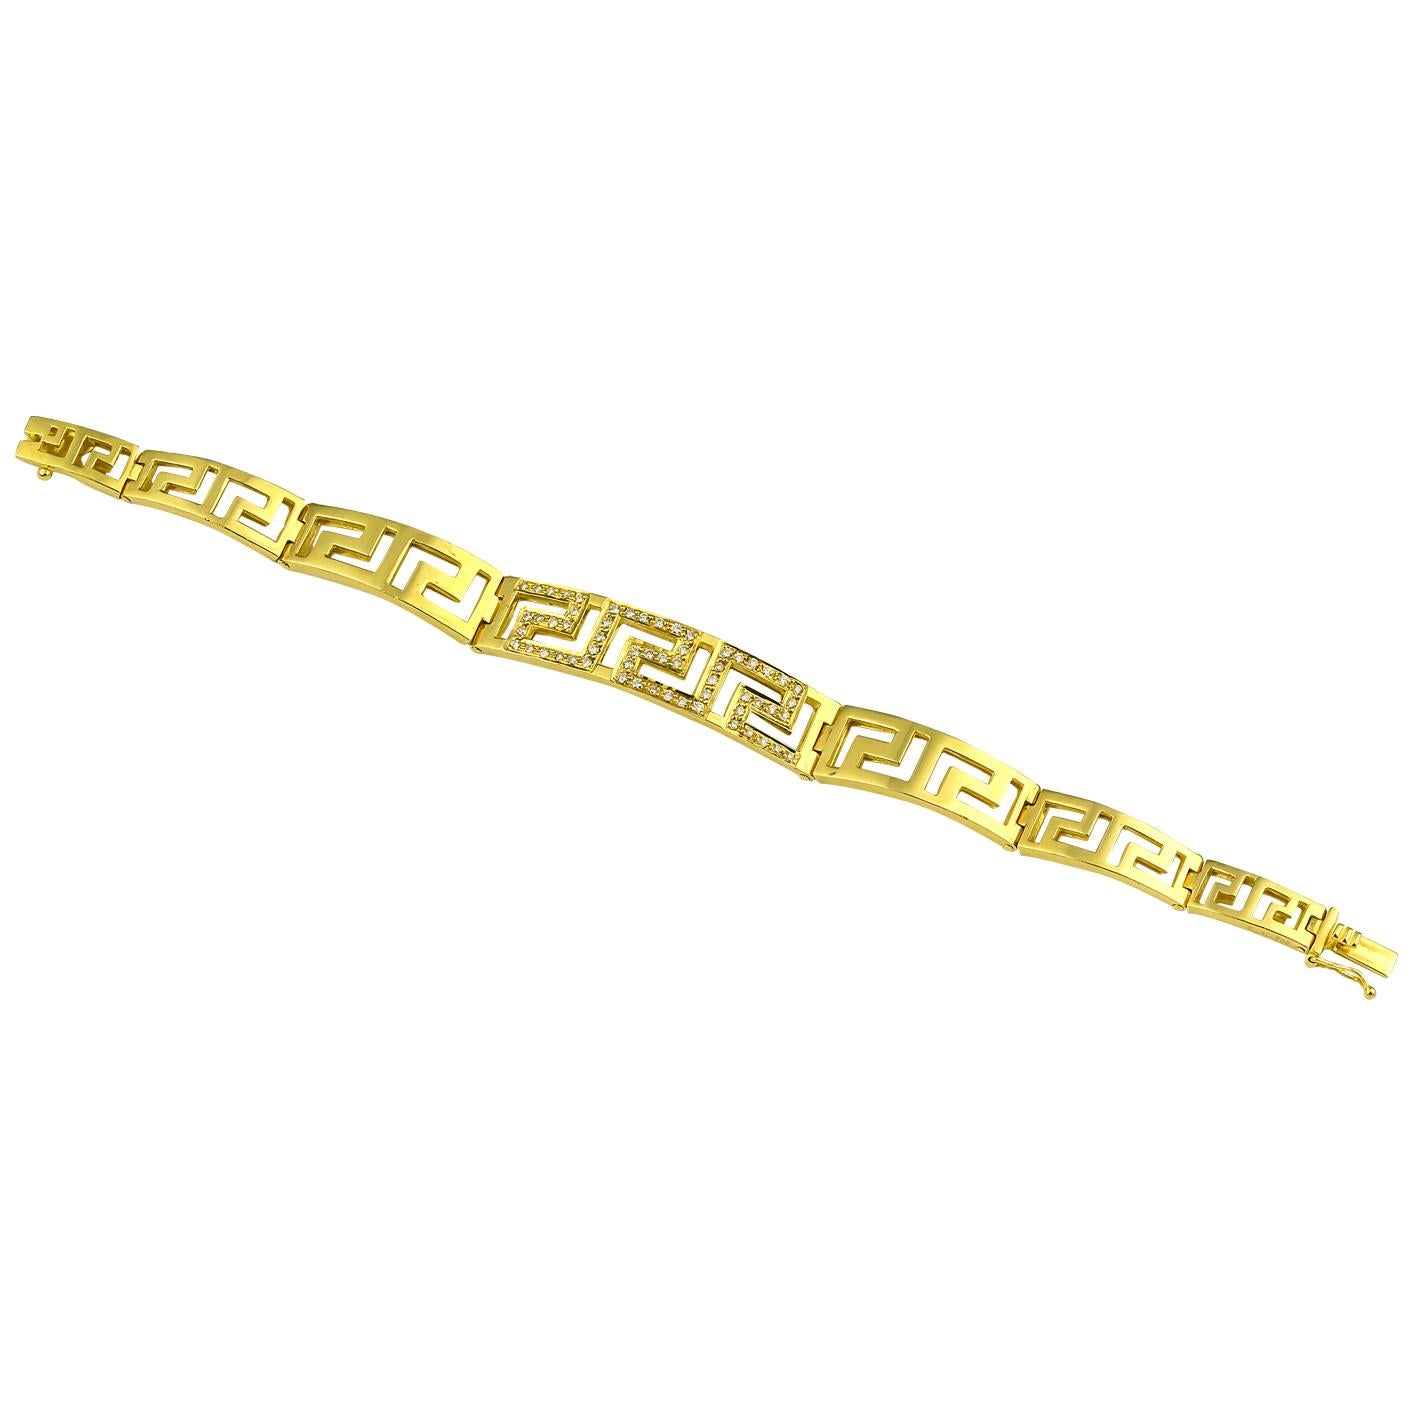 S.Georgios designer Greek Key bracelet in solid yellow gold 18 karats all handmade with the Greek Key design, the symbol of eternal life. The Bracelet is custom made and has brilliant cut white diamonds total weight of 0.65 Carat.
This beautiful